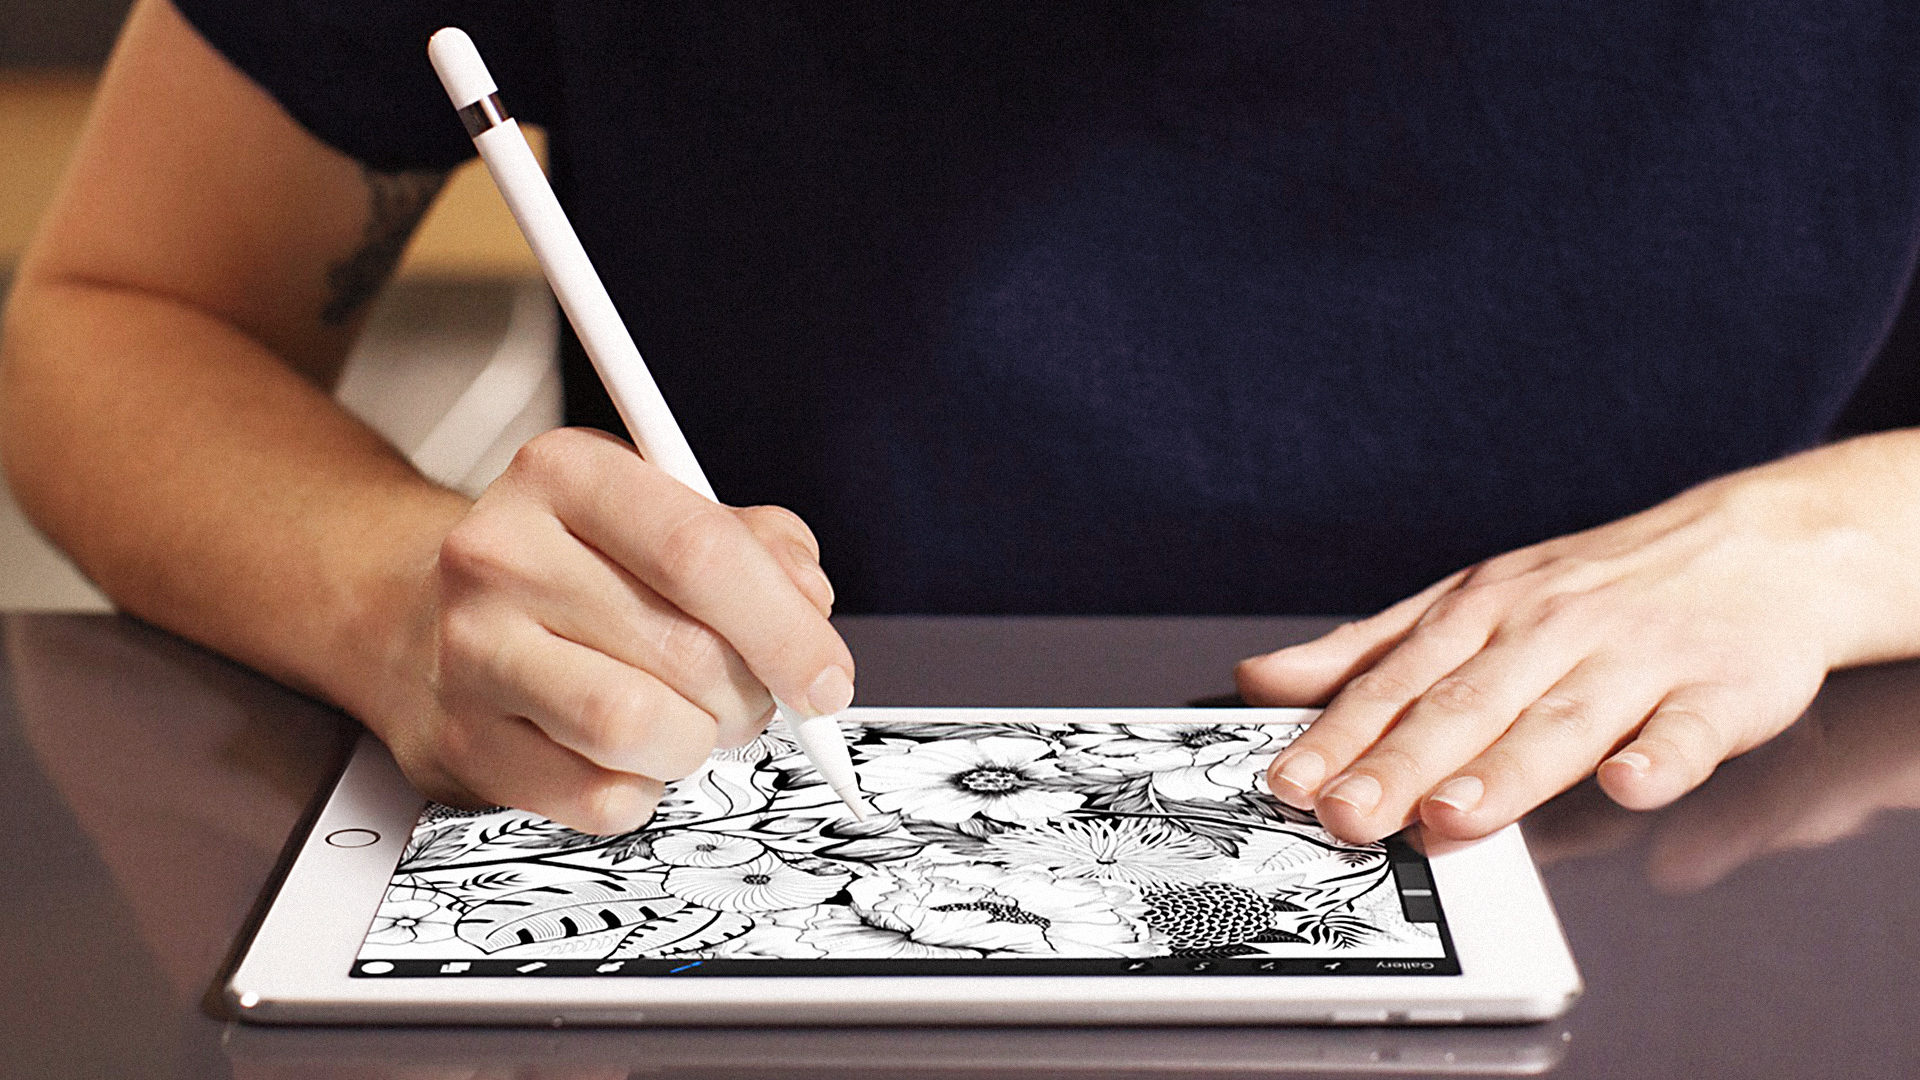 Who’s Using The iPad Pro At Work? Tattoo Artists | Fast Company | The